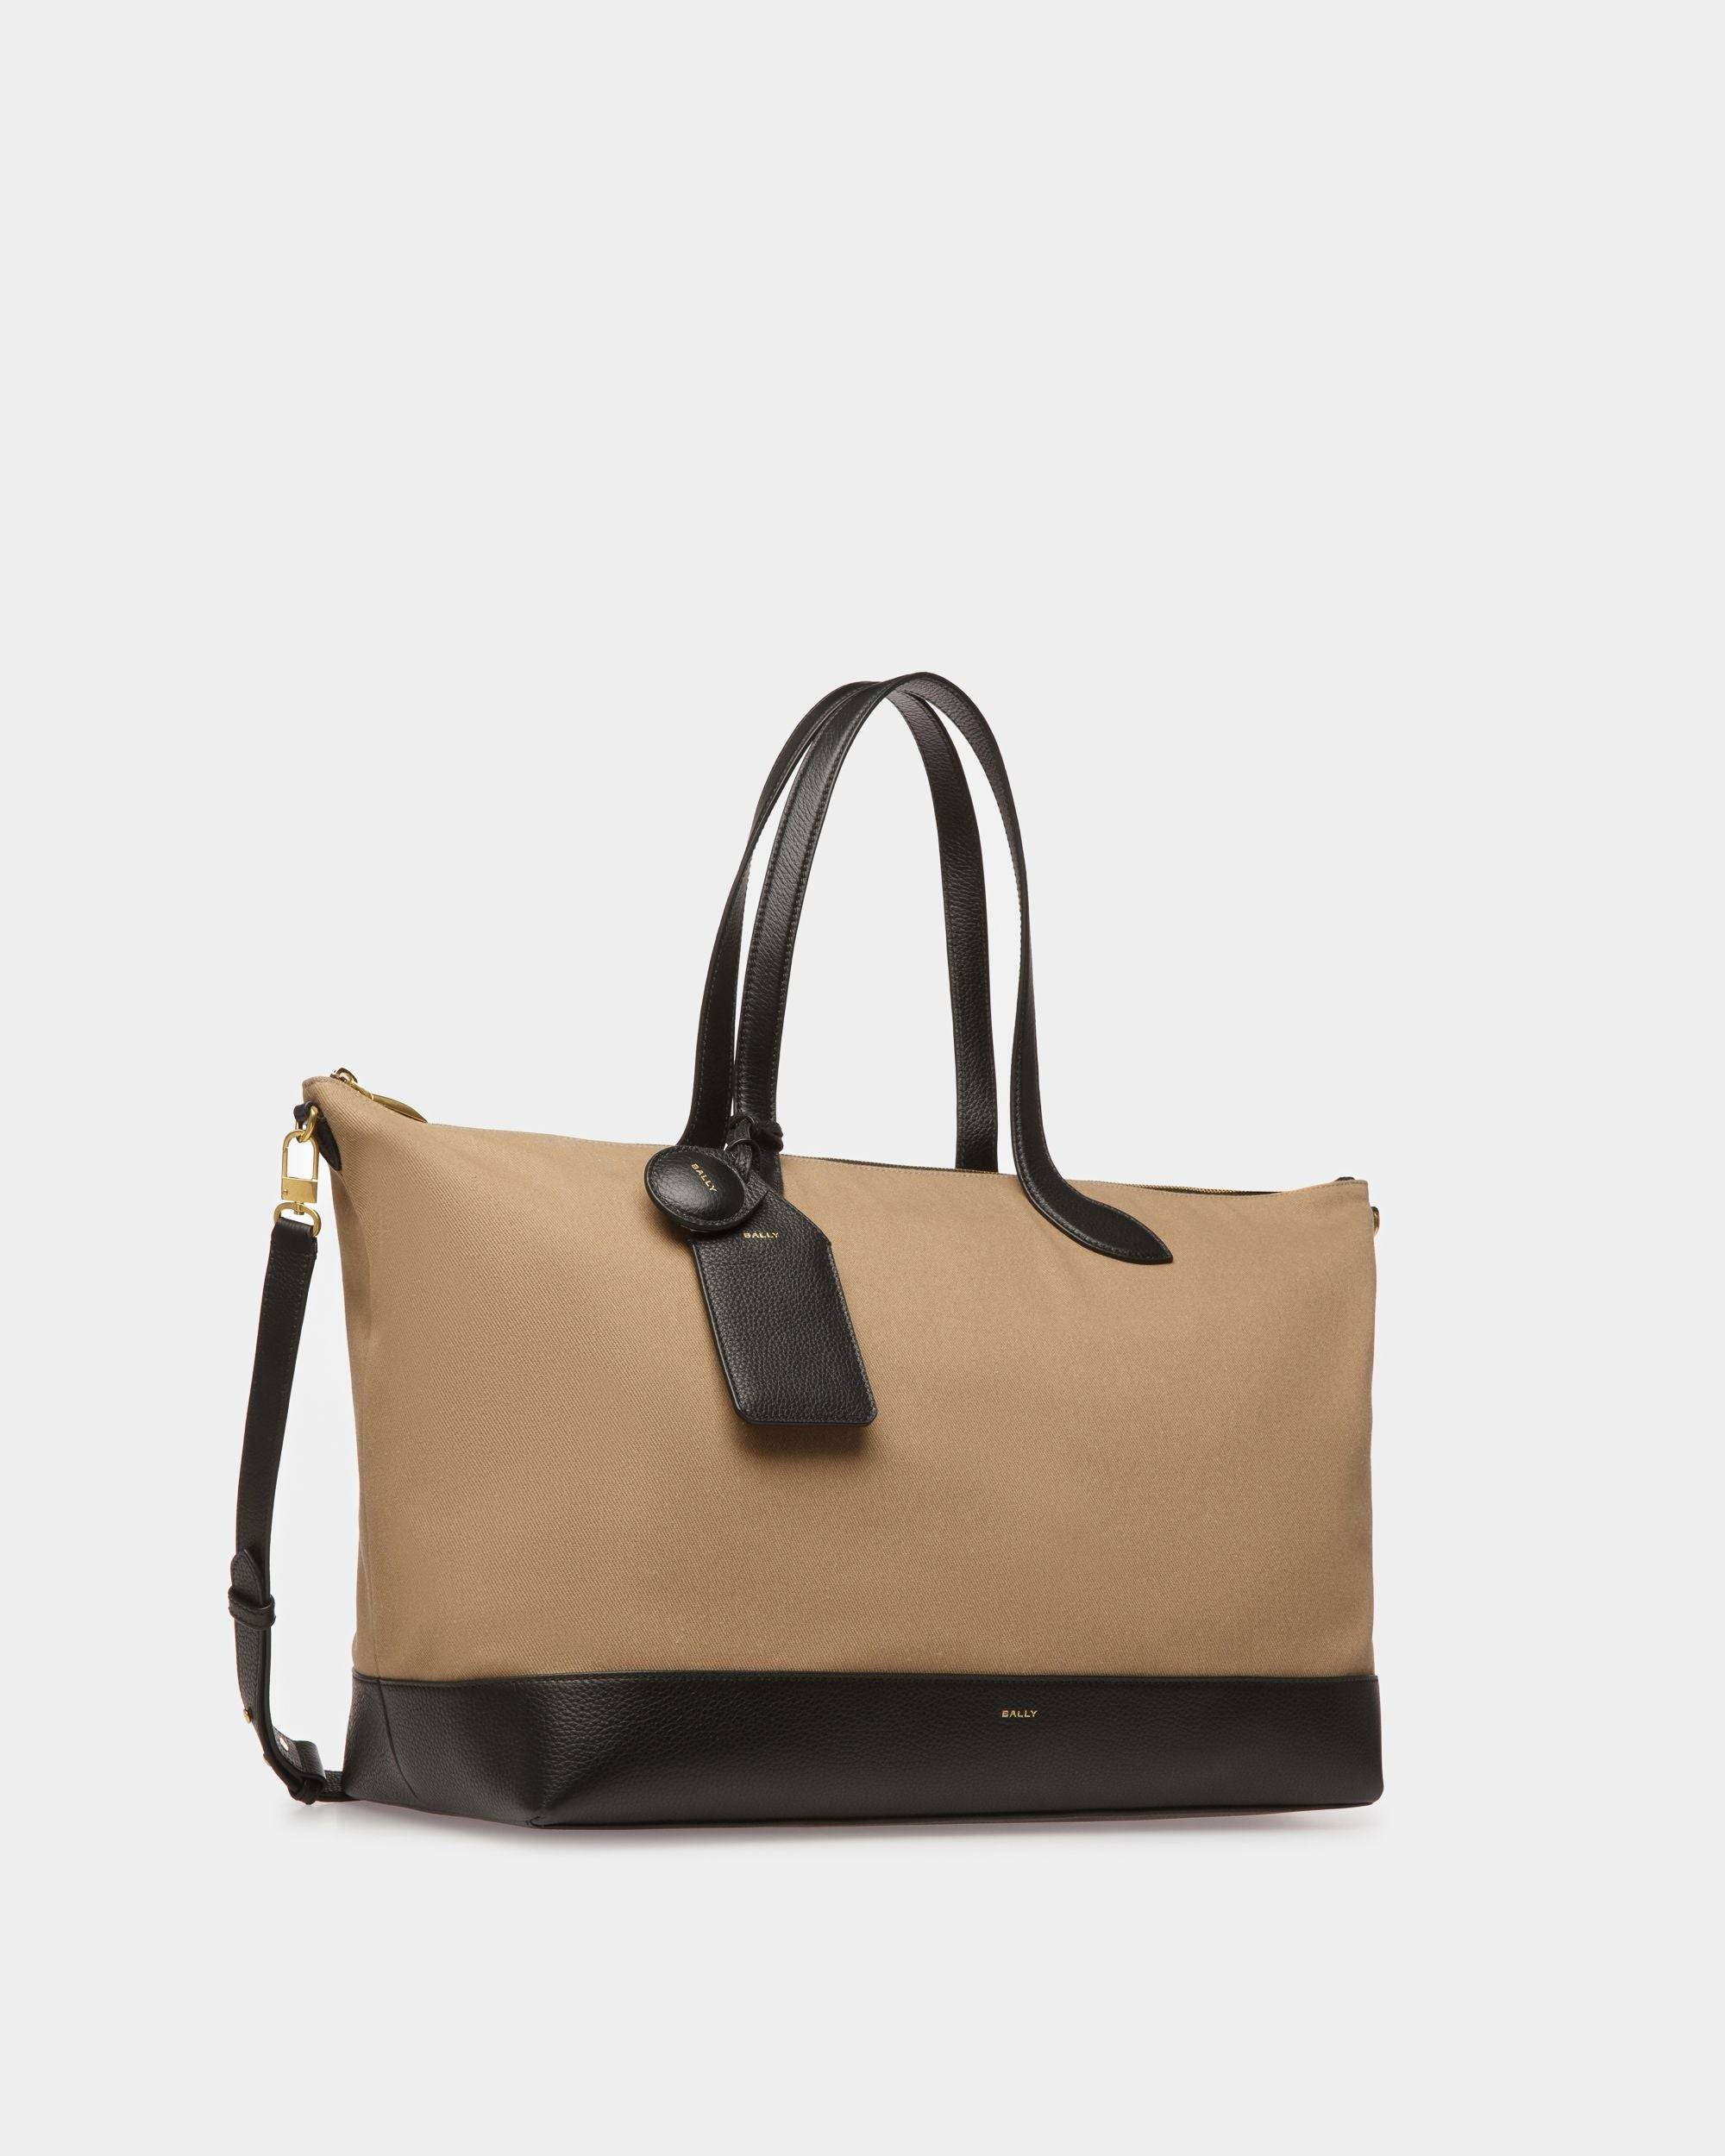 24 Hours | Women's Tote Bag | Sand And Black Fabric | Bally | Still Life 3/4 Front